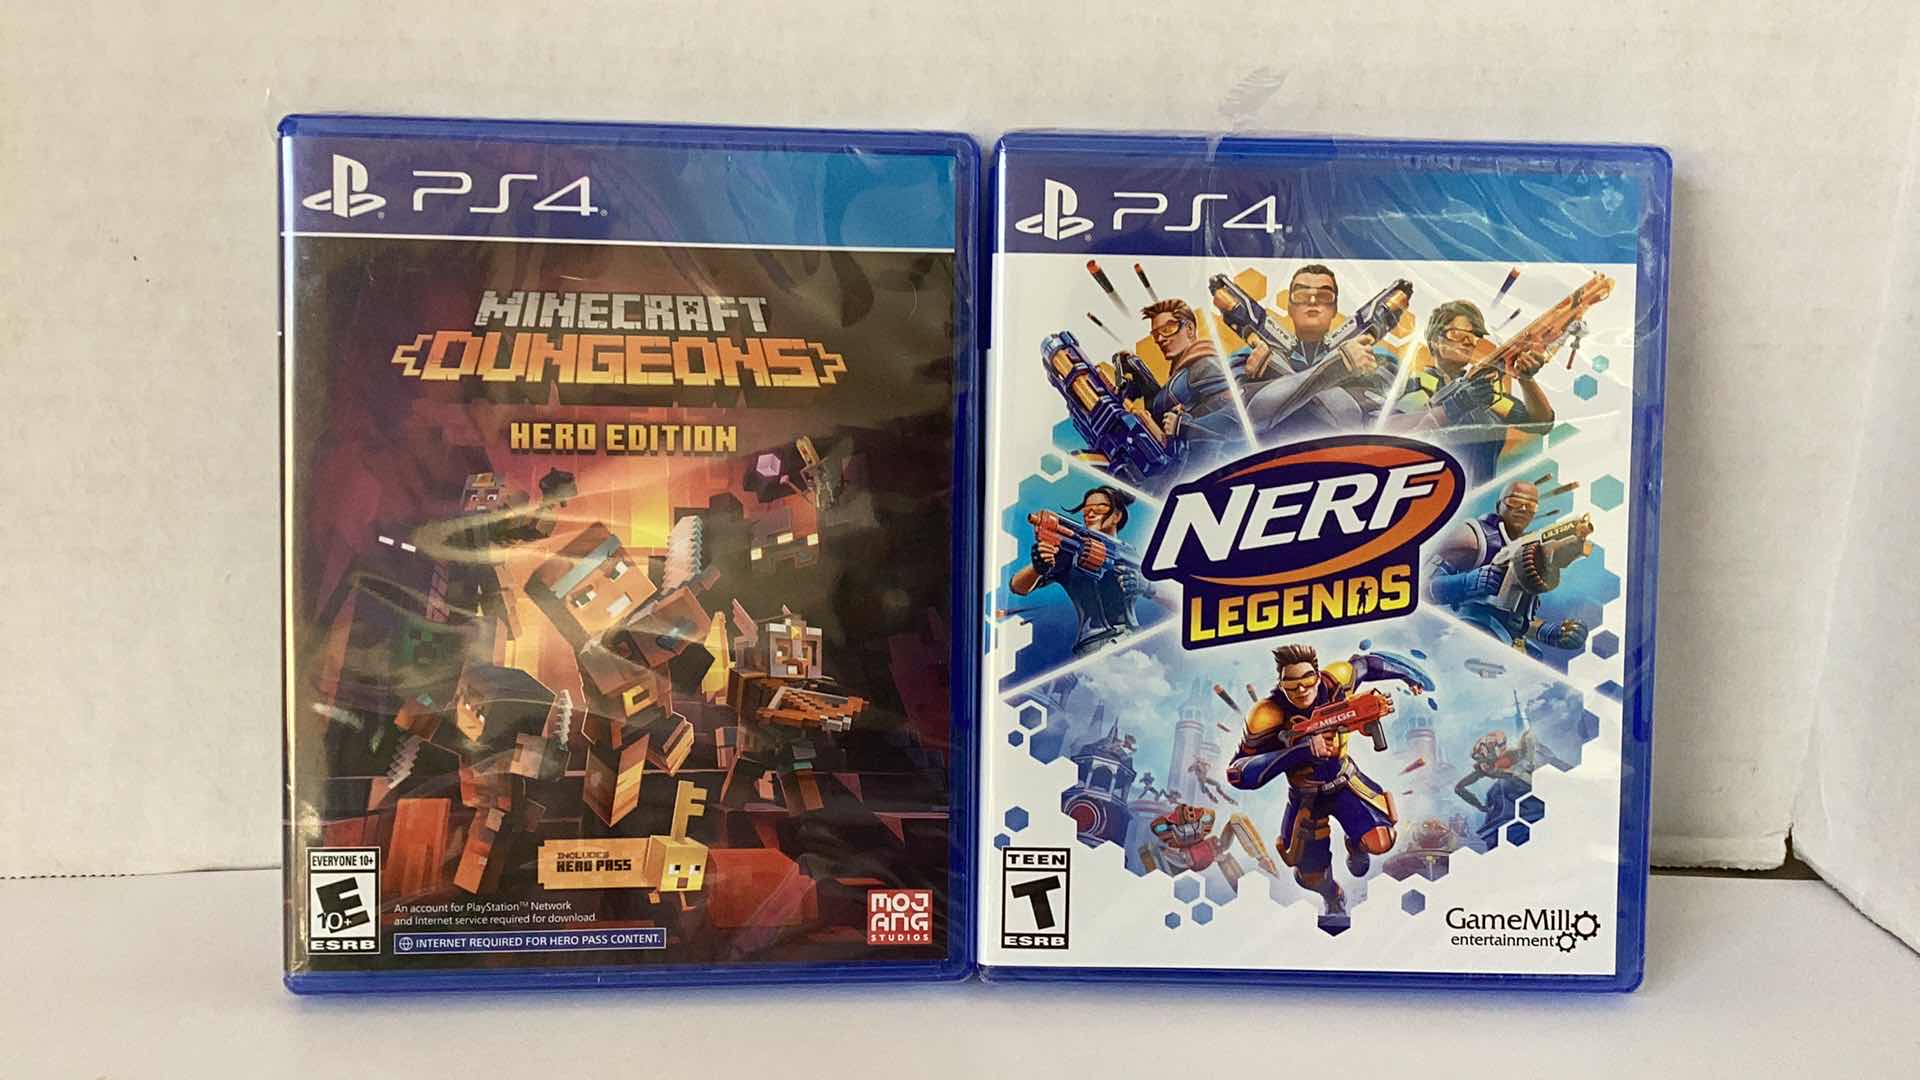 Photo 1 of 2 NEW PS4 GAMES: MINECRAFT DUNGEONS HERO EDITION AND NERF LEGENDS